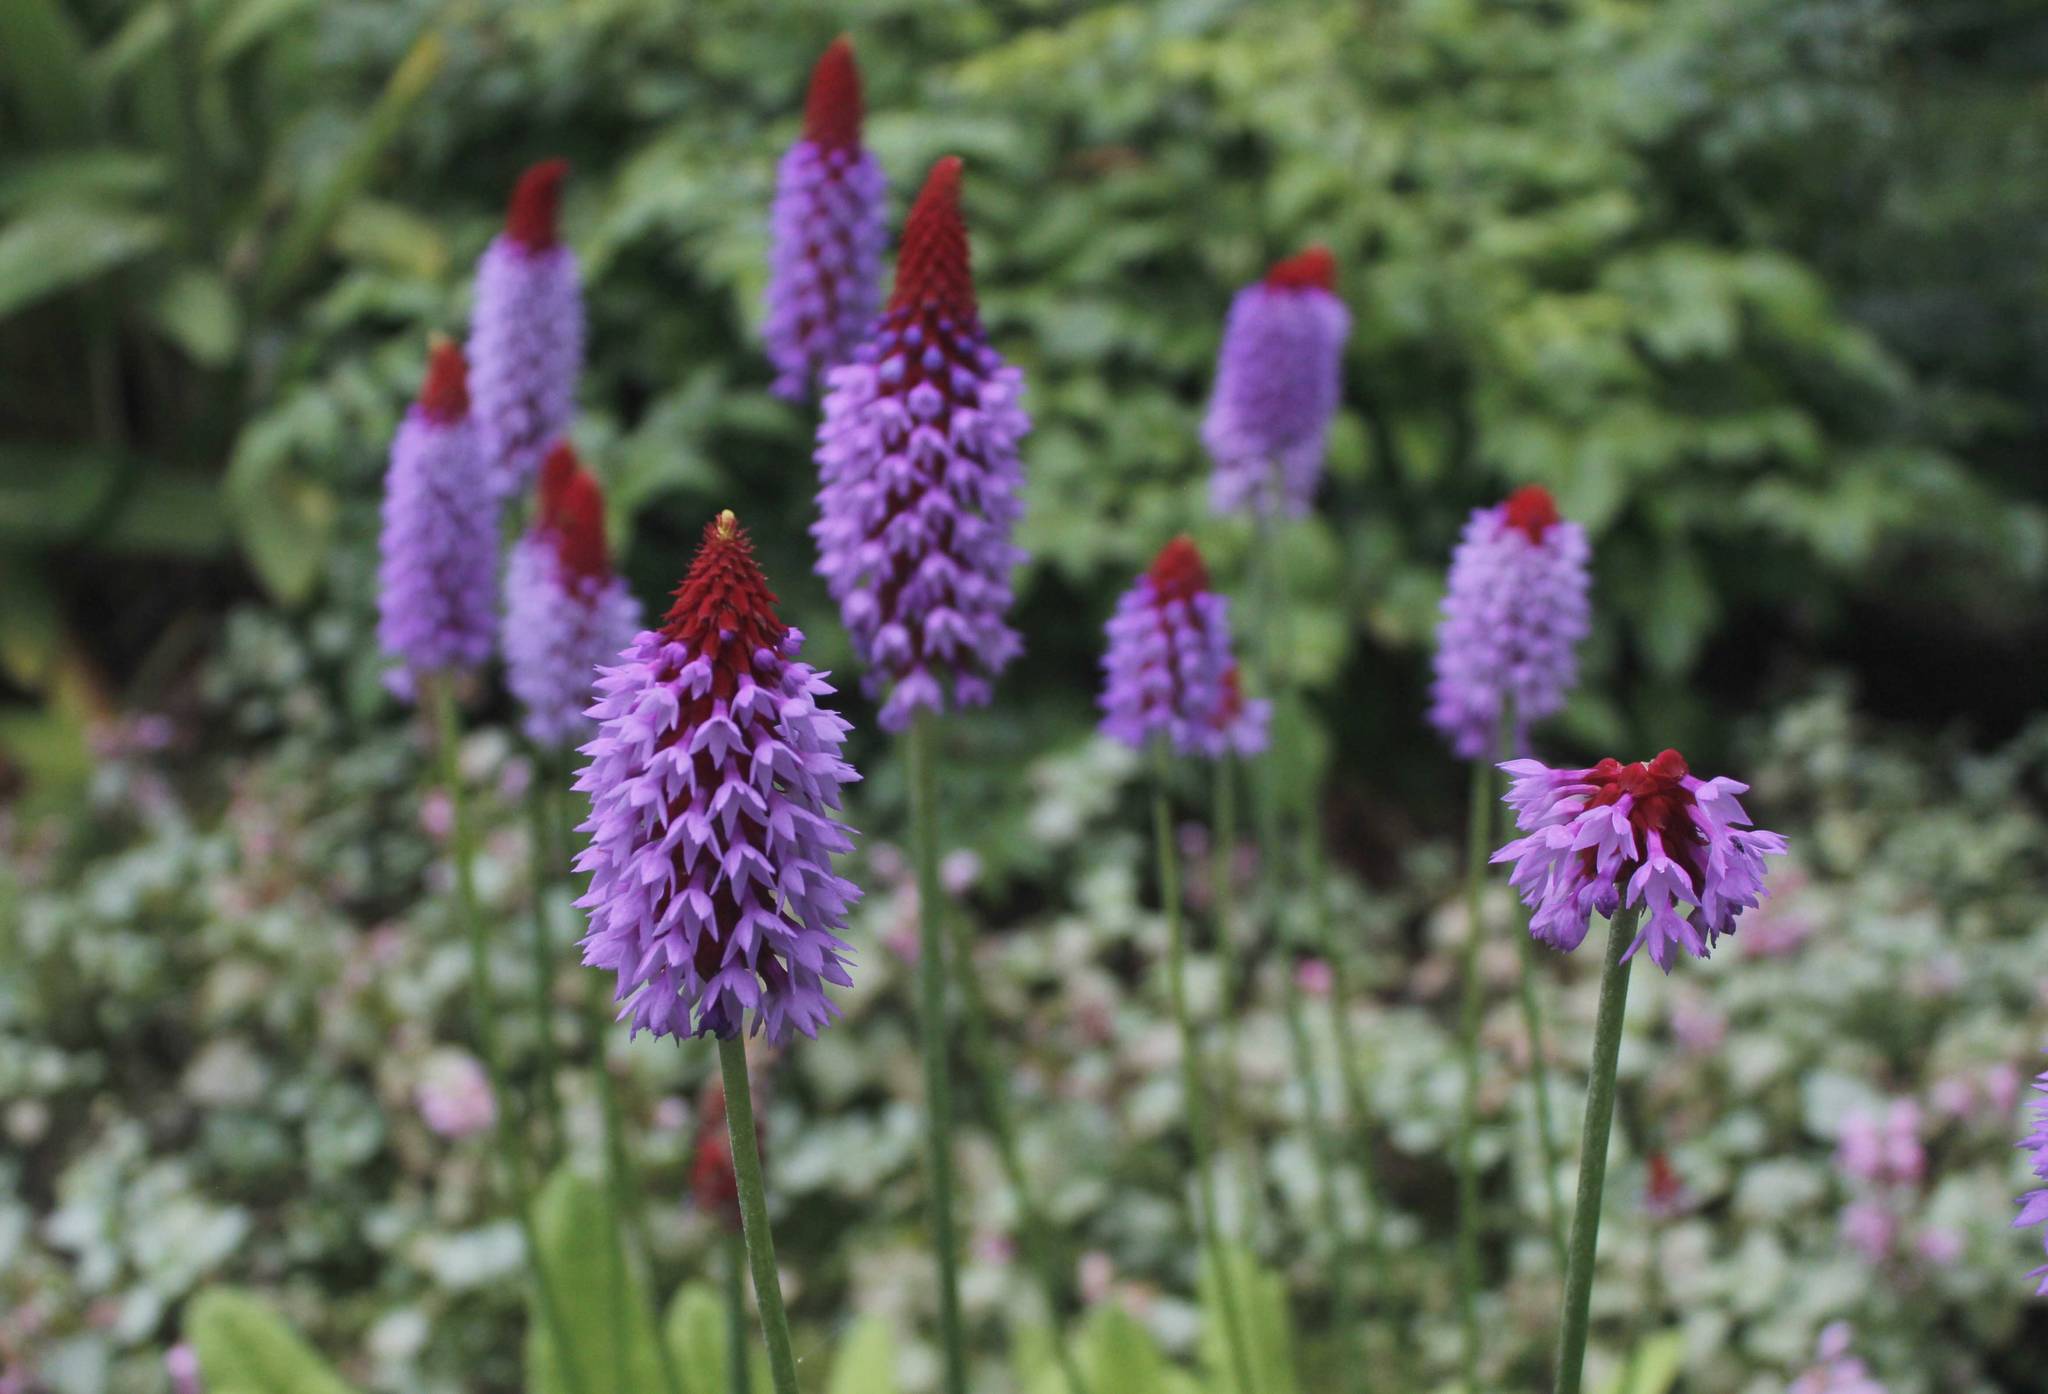 A Primula vialii blooms in the Jensen-Olson Arboretum on Tuesday, July 25, 2017. The arboretum boasts North America’s largest primula (primrose) collection, with about 200 varieties. (Alex McCarthy | Juneau Empire File)